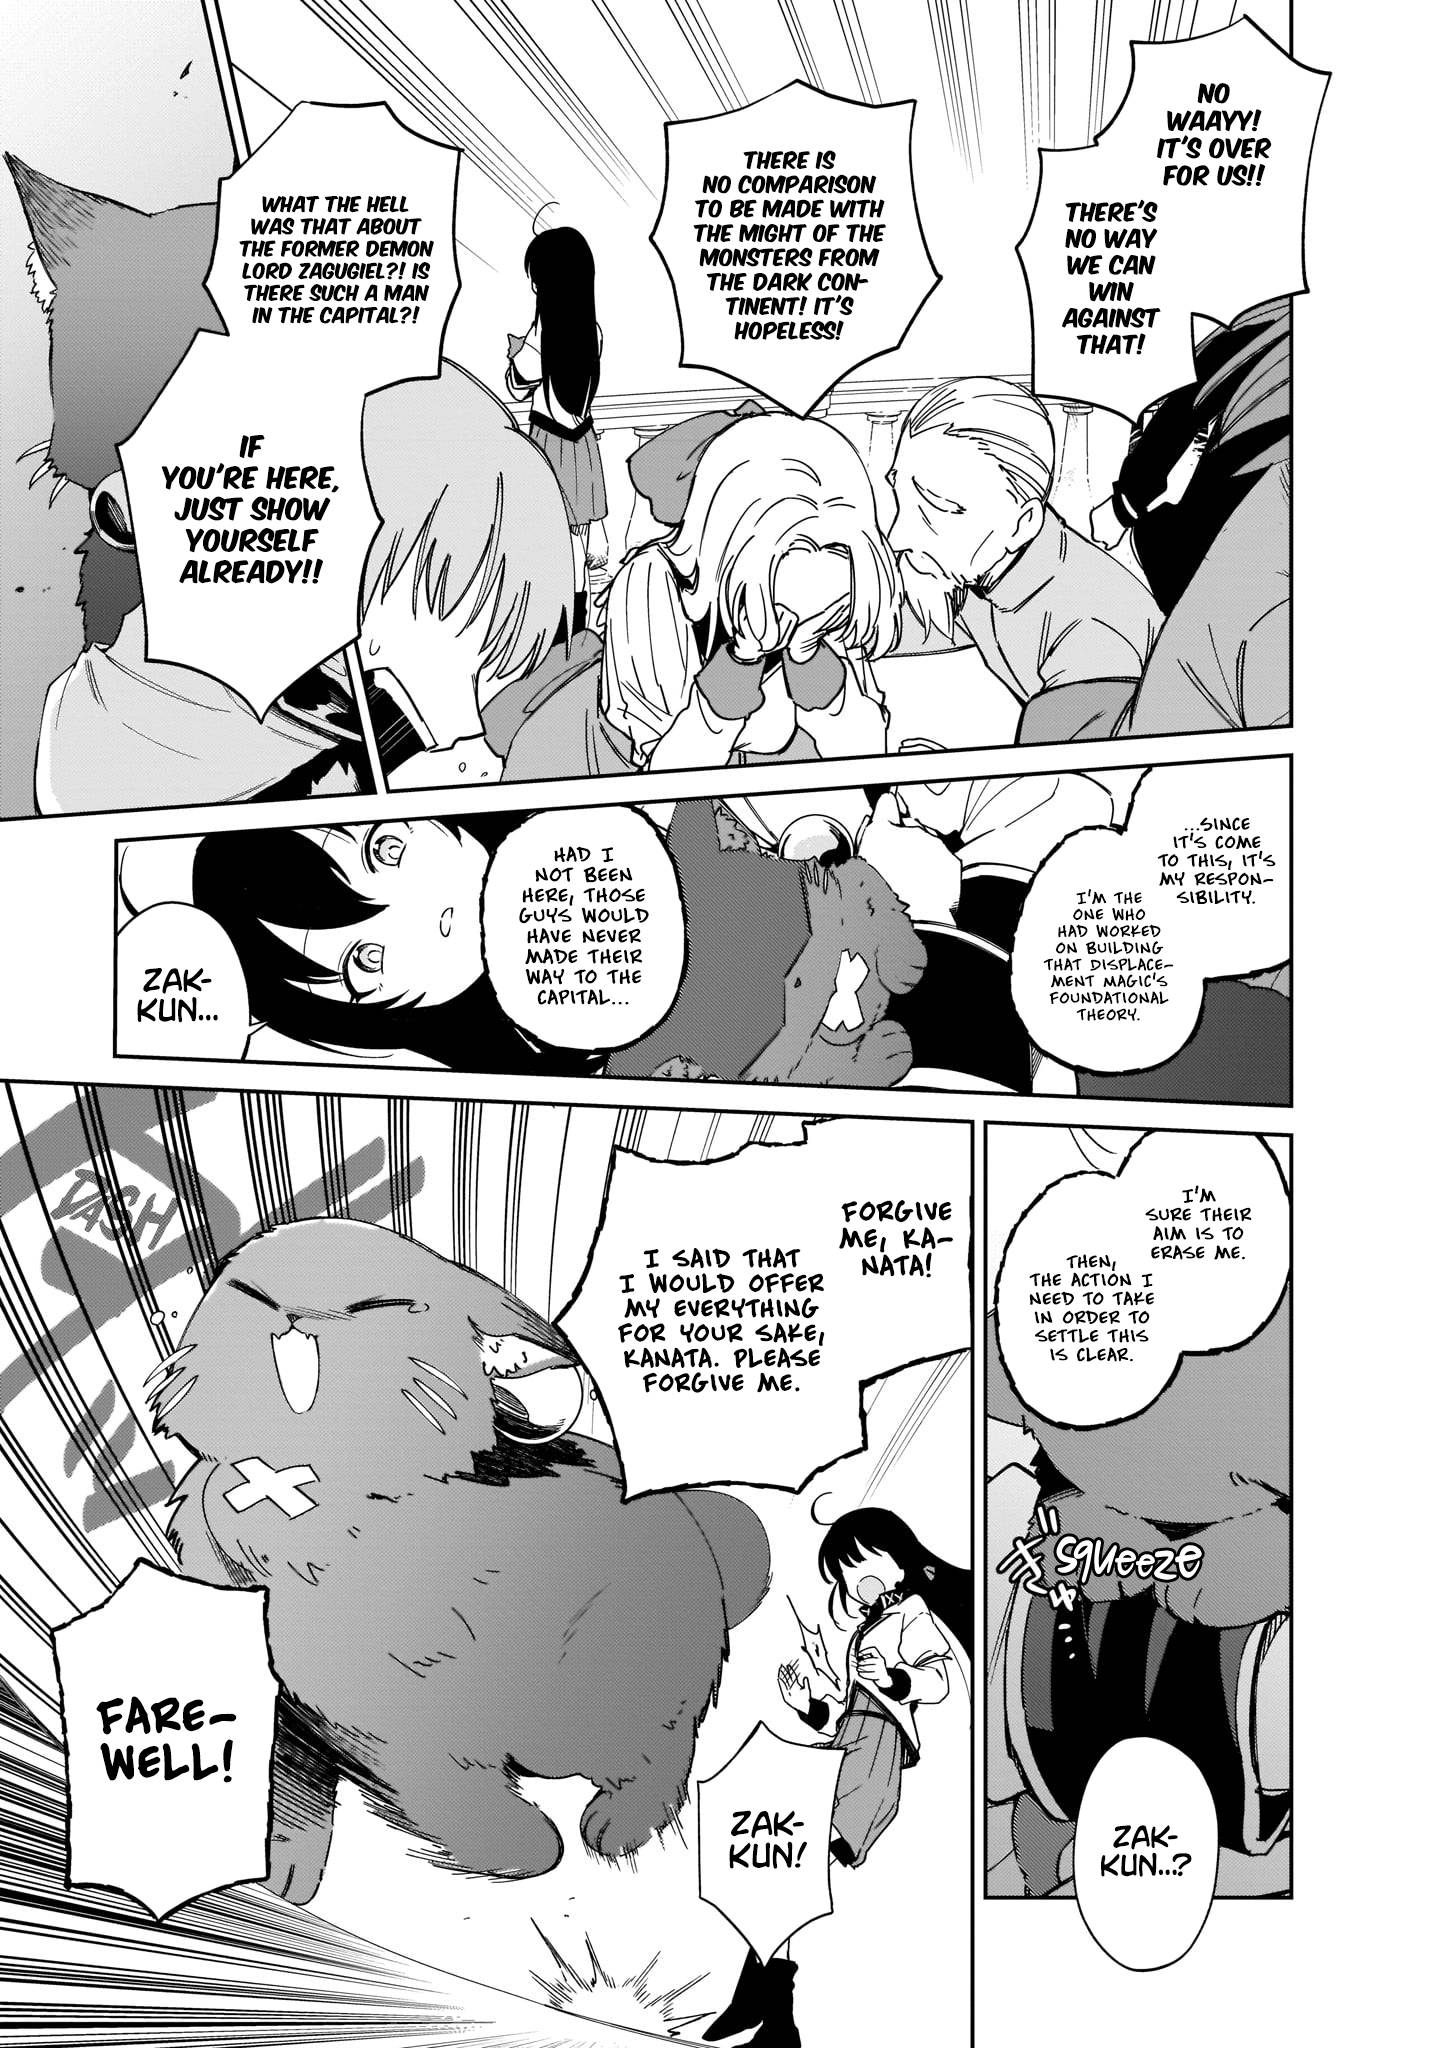 DISC] Saint? No, Just a Passing Monster Tamer! - Chapter 7 : r/manga